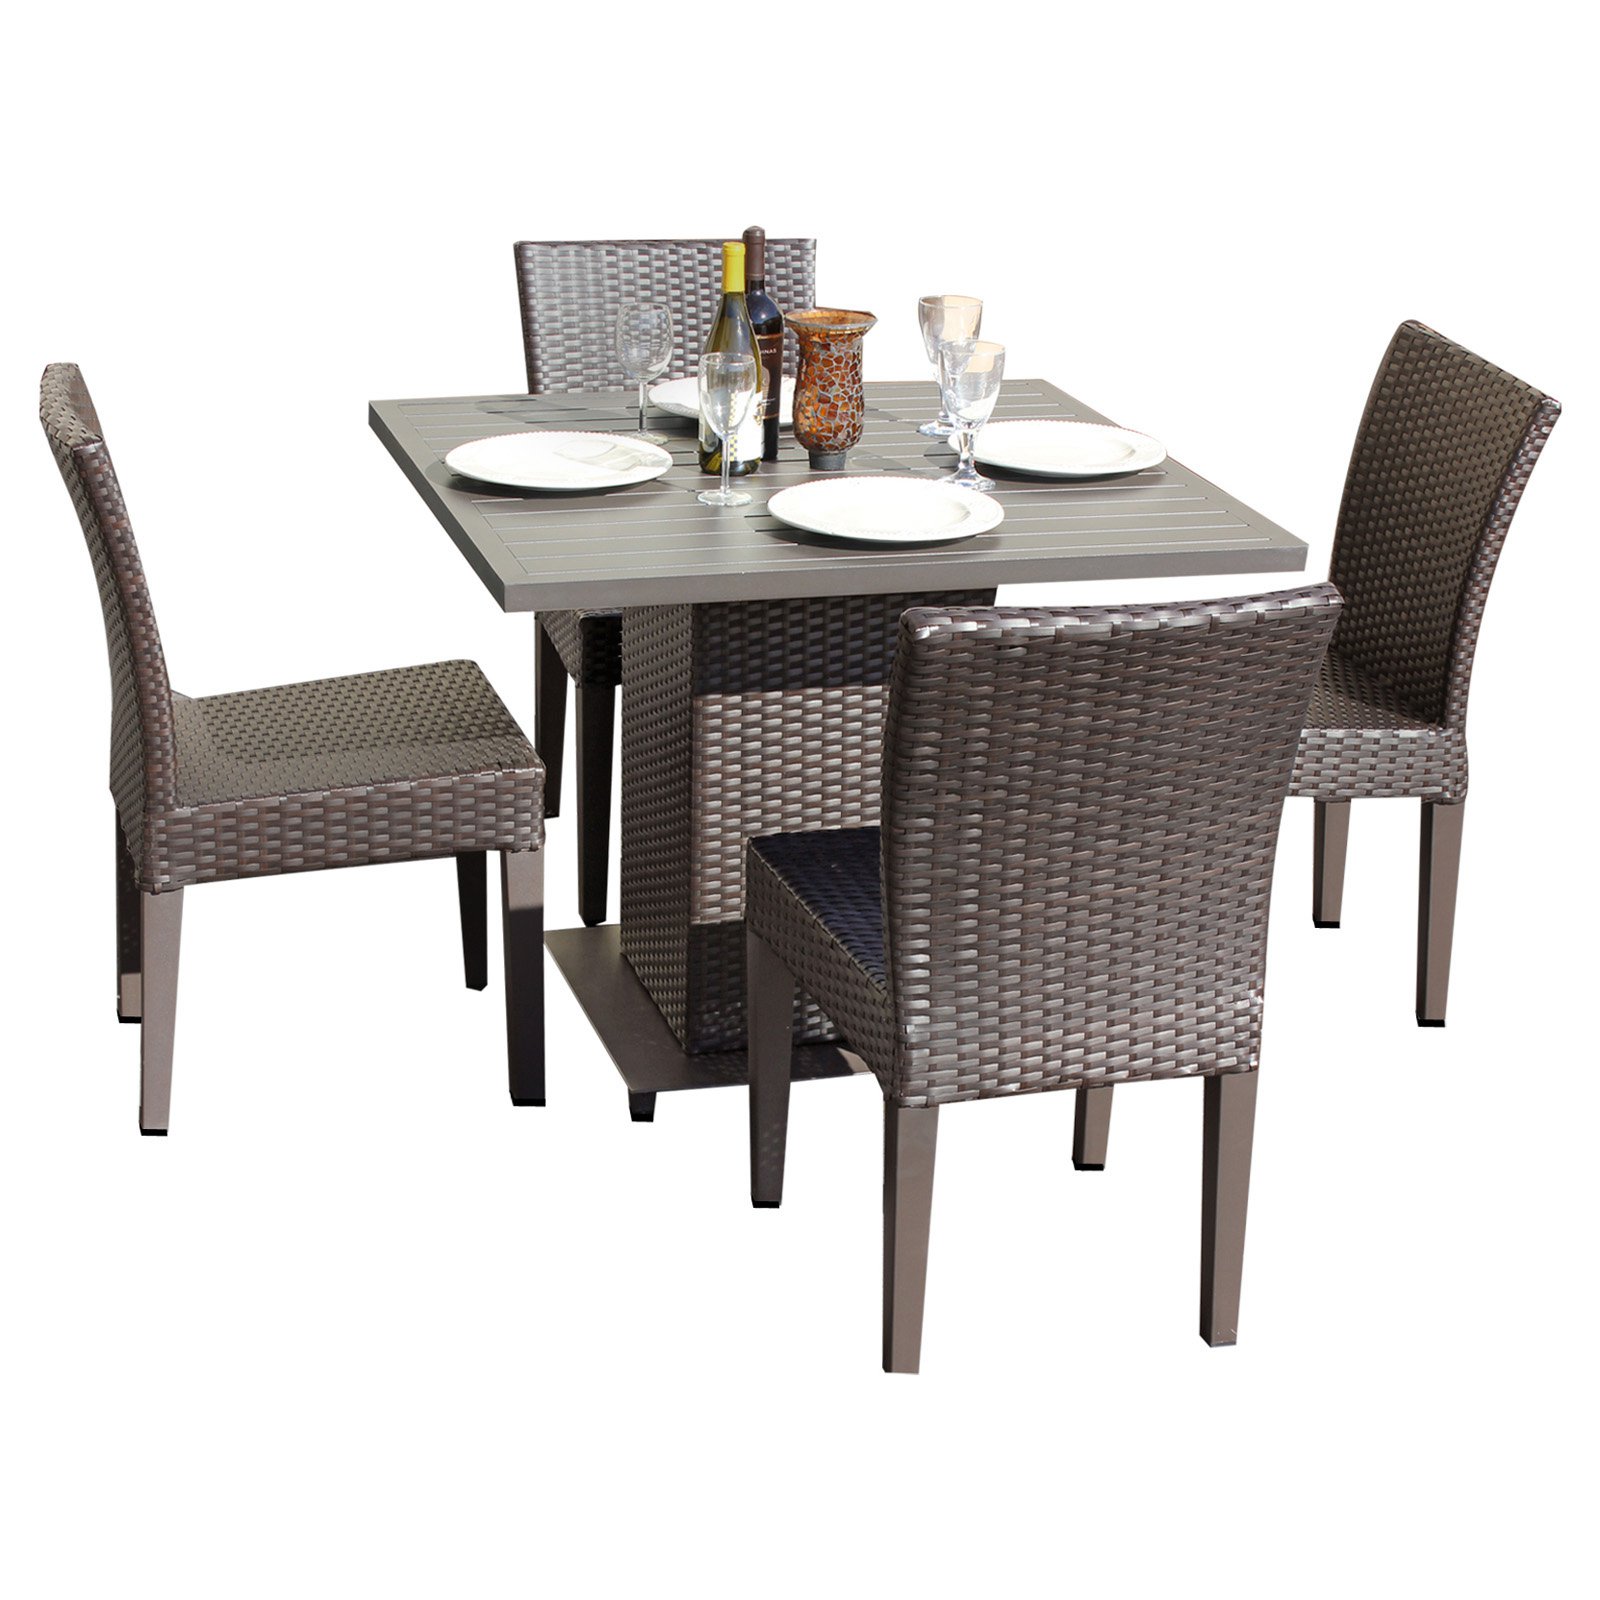 Belle Square Dining Table with 4 Armless Chairs in Grey - image 2 of 2